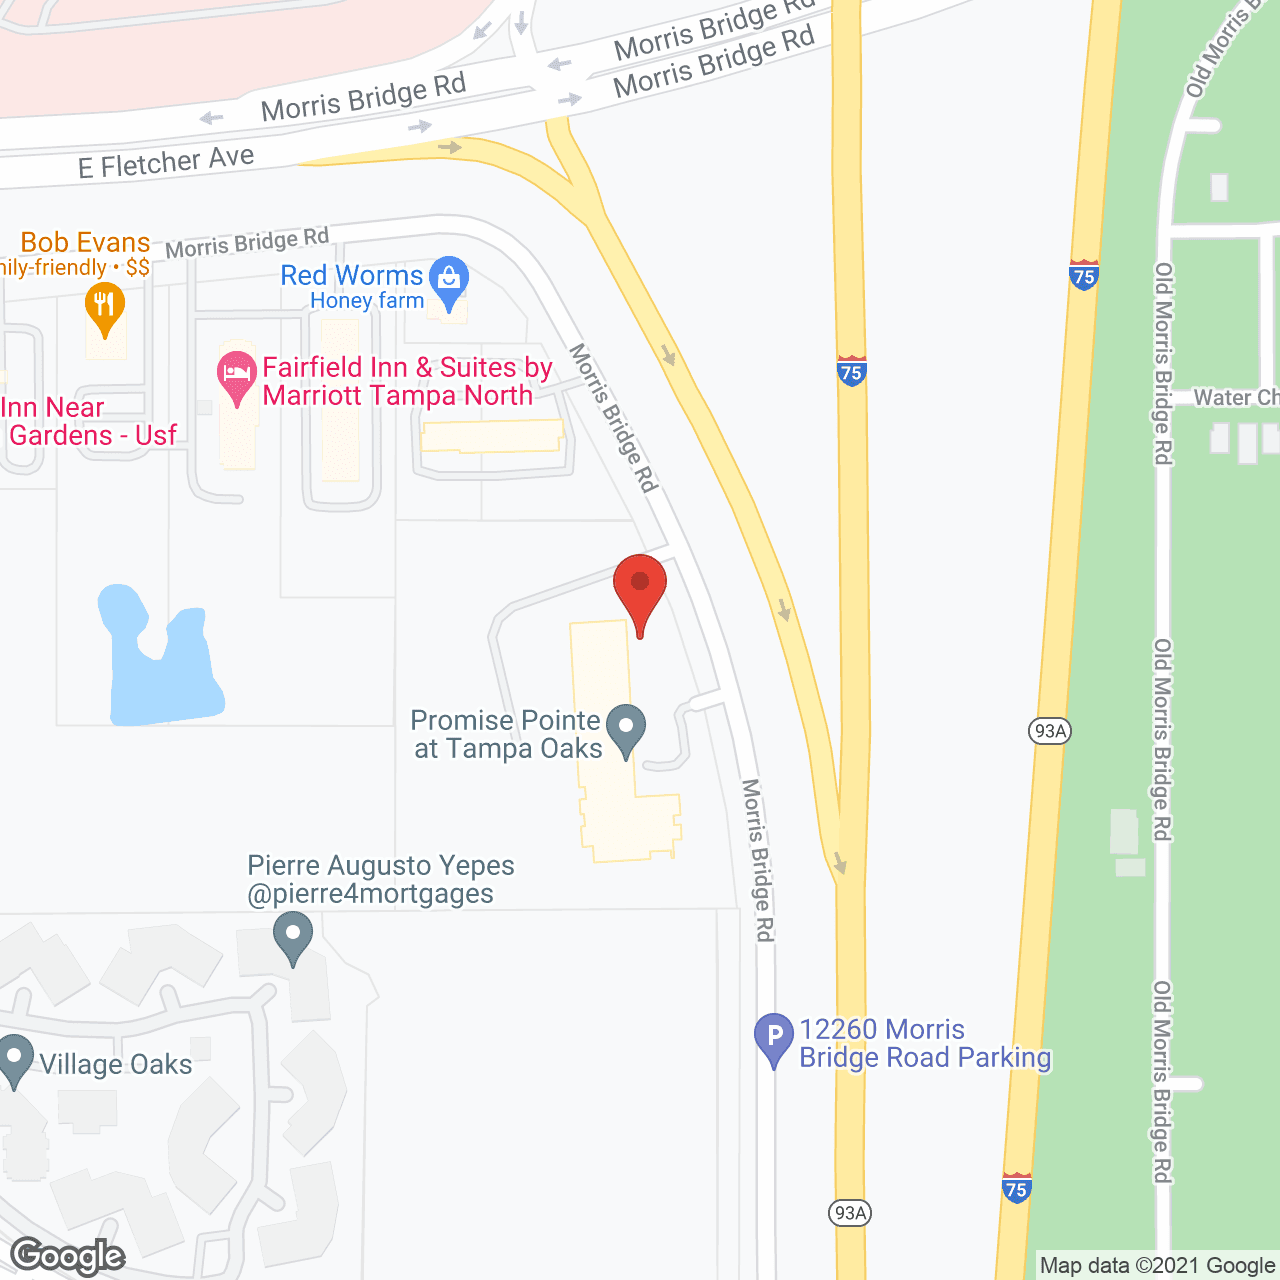 Promise Pointe at Tampa Oaks in google map